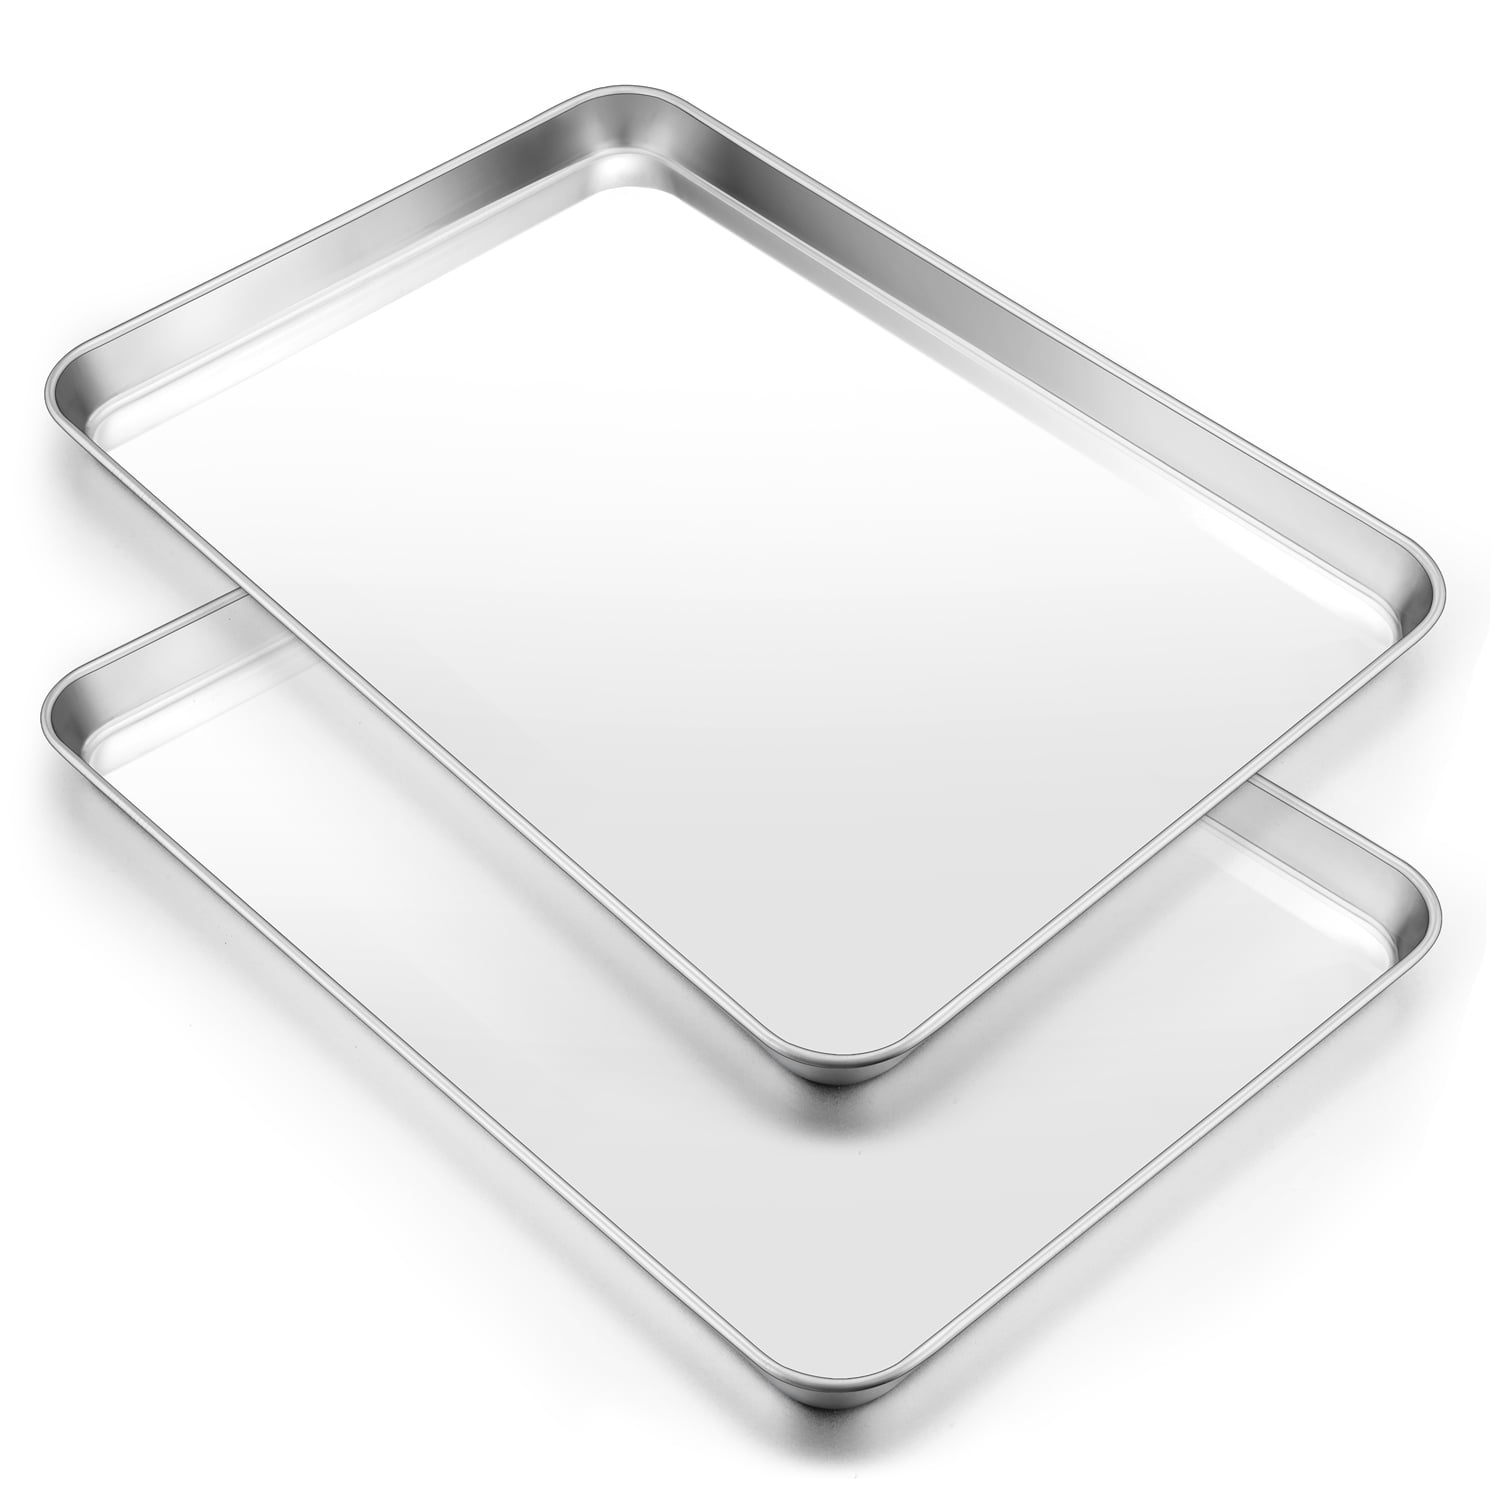 Extra Large Baking Sheet Set of 2, P&P CHEF Stainless Steel Bakeware Cookie  Sheet Baking Pan, Rectangle 19.6''x13.5''x1.2'', Heavy Duty & Large